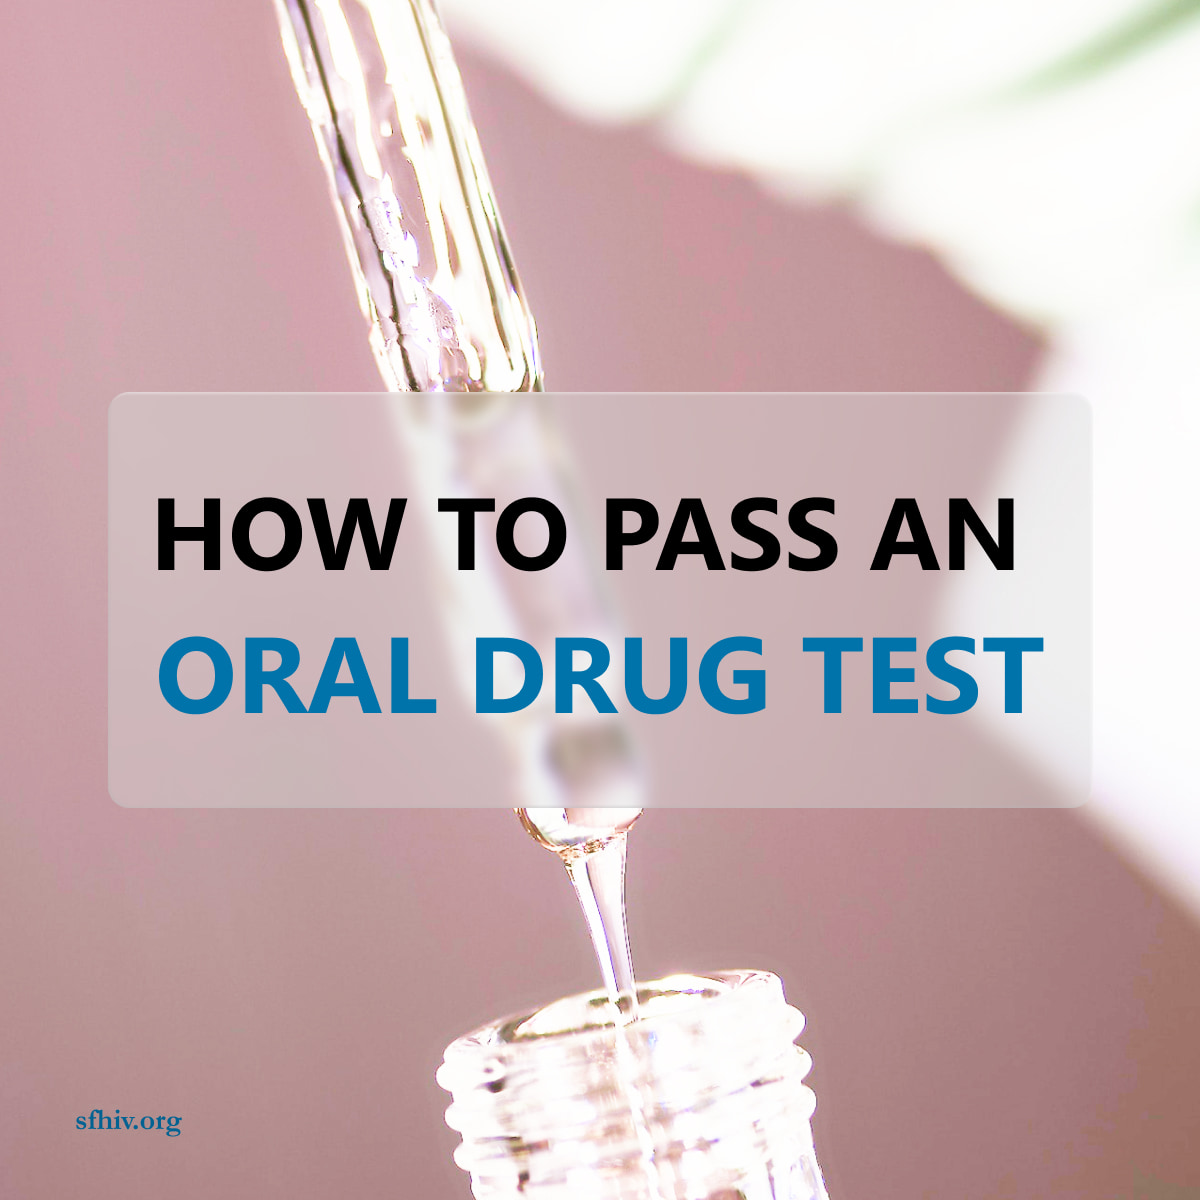 How To Pass a Oral Drug Test